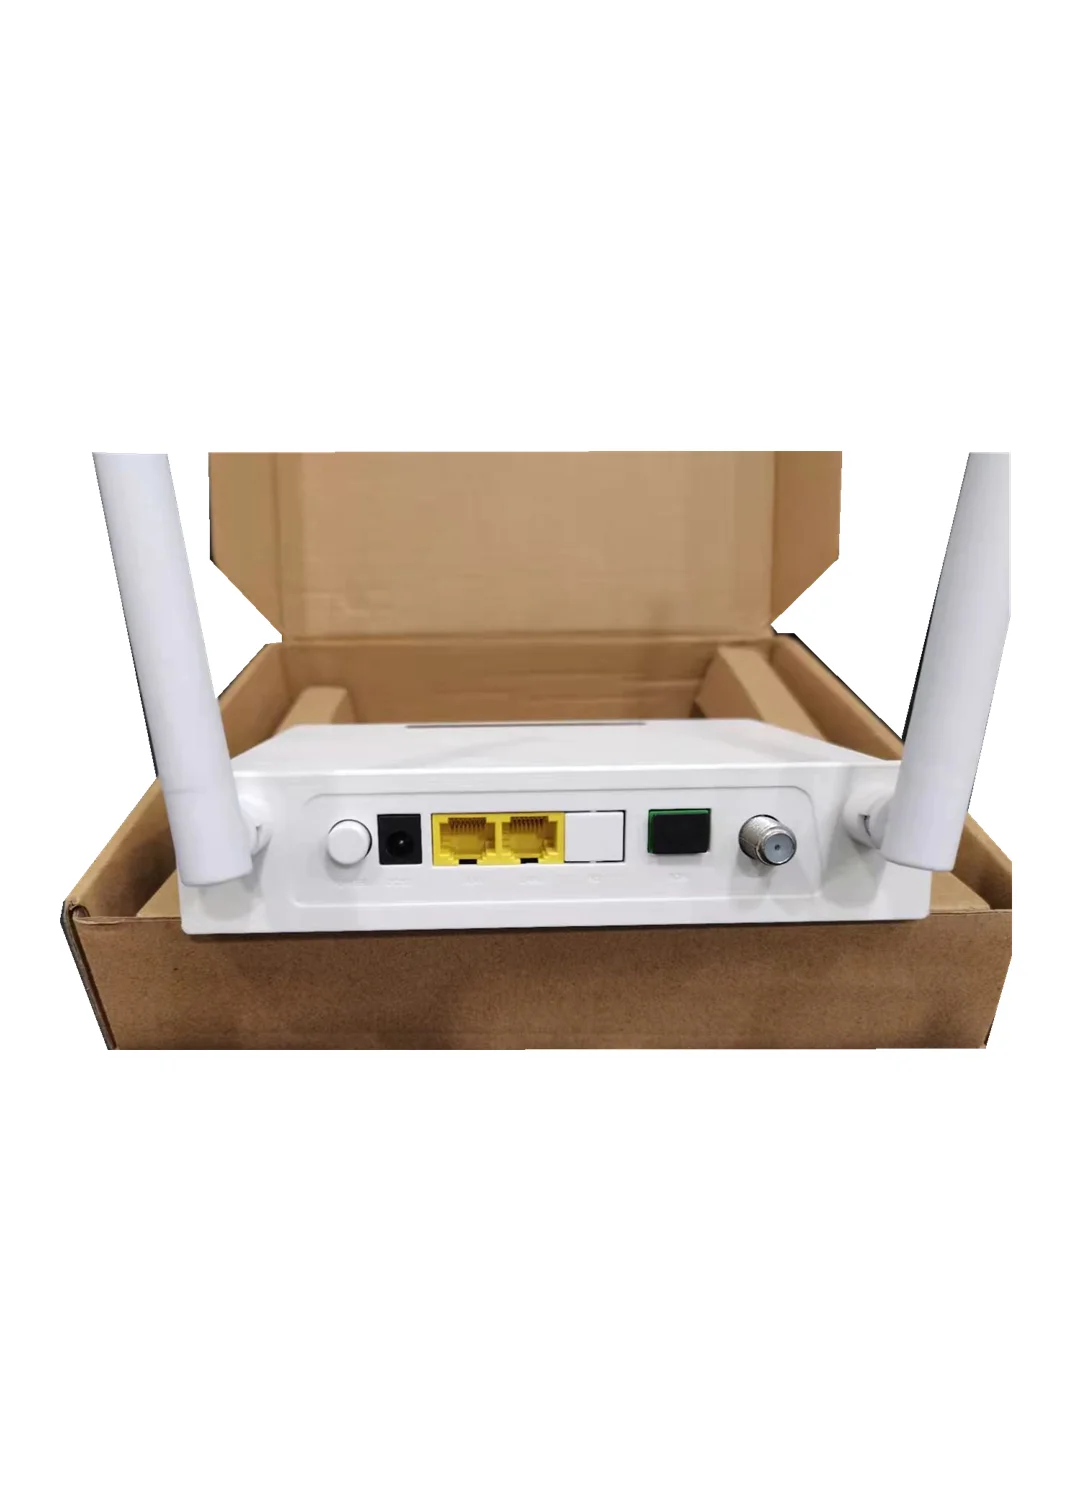 New ONT ONU XPON 1GE+1FE+WiFi ONU ONT for FTTH modem,ont Termina English version no power for OLT